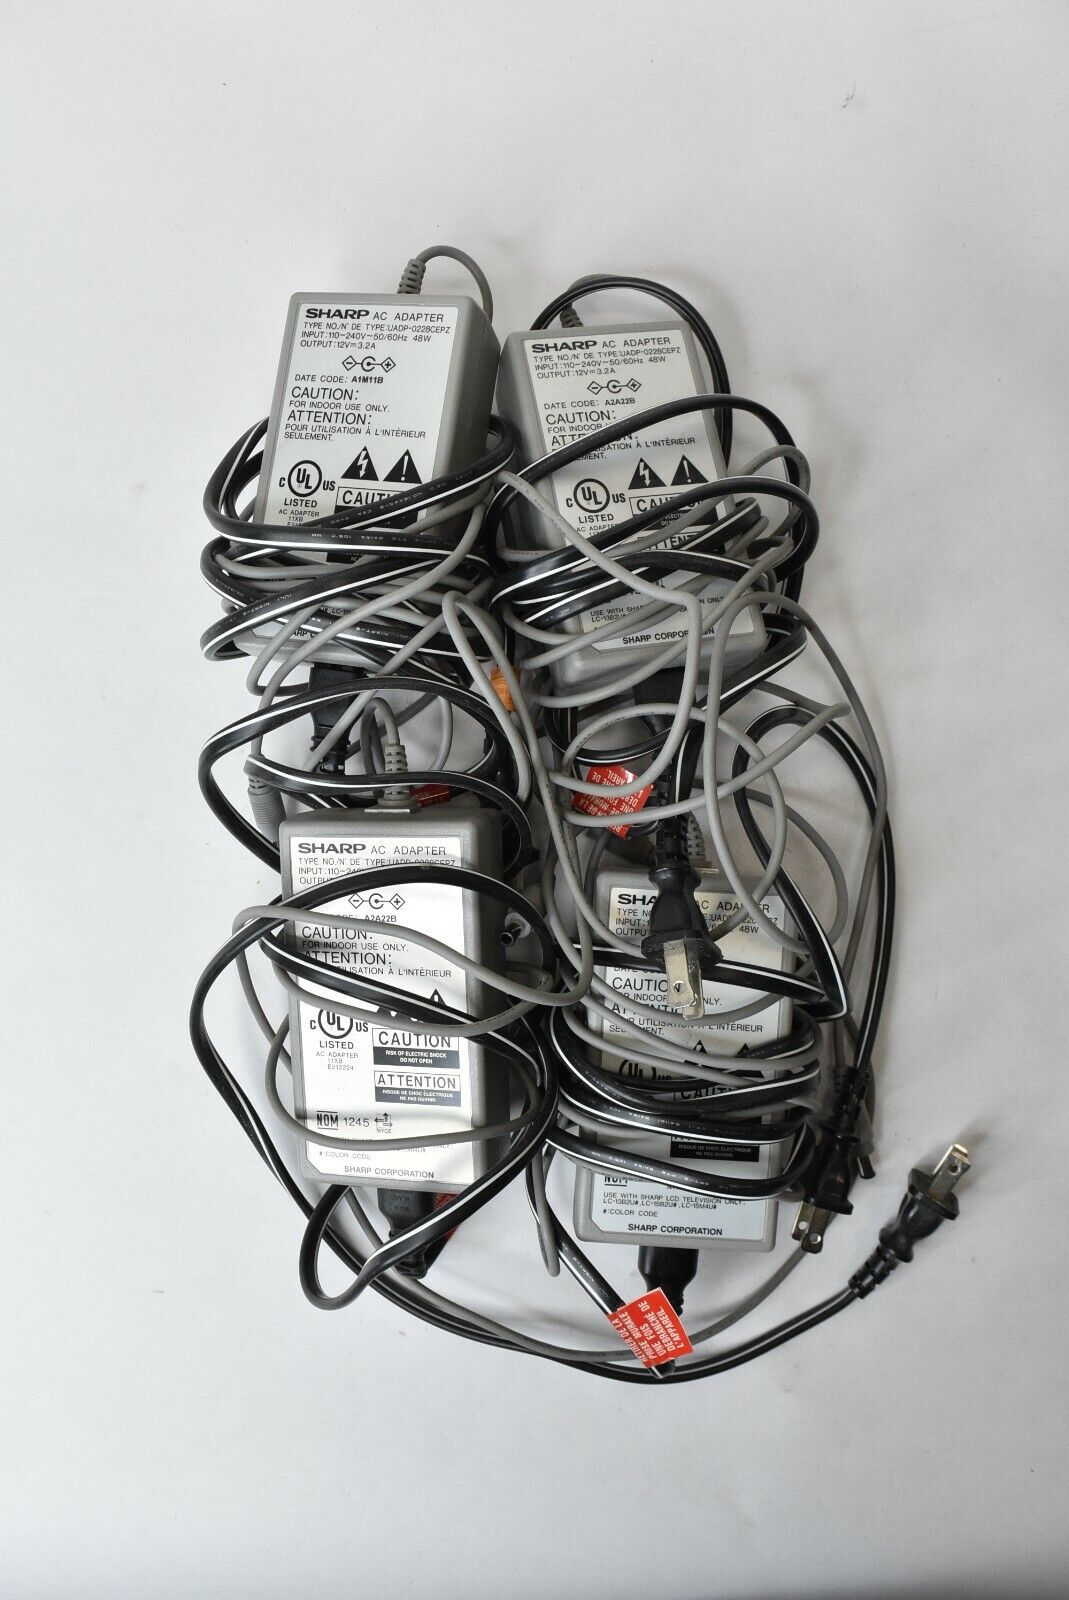 Lot of 4 Sharp AC Adapter Power Supply Unit UADP-0228CEPZ 12V 3.2A Brand: Sharp Connection Split/Duplication: 1:2 Fe - Click Image to Close